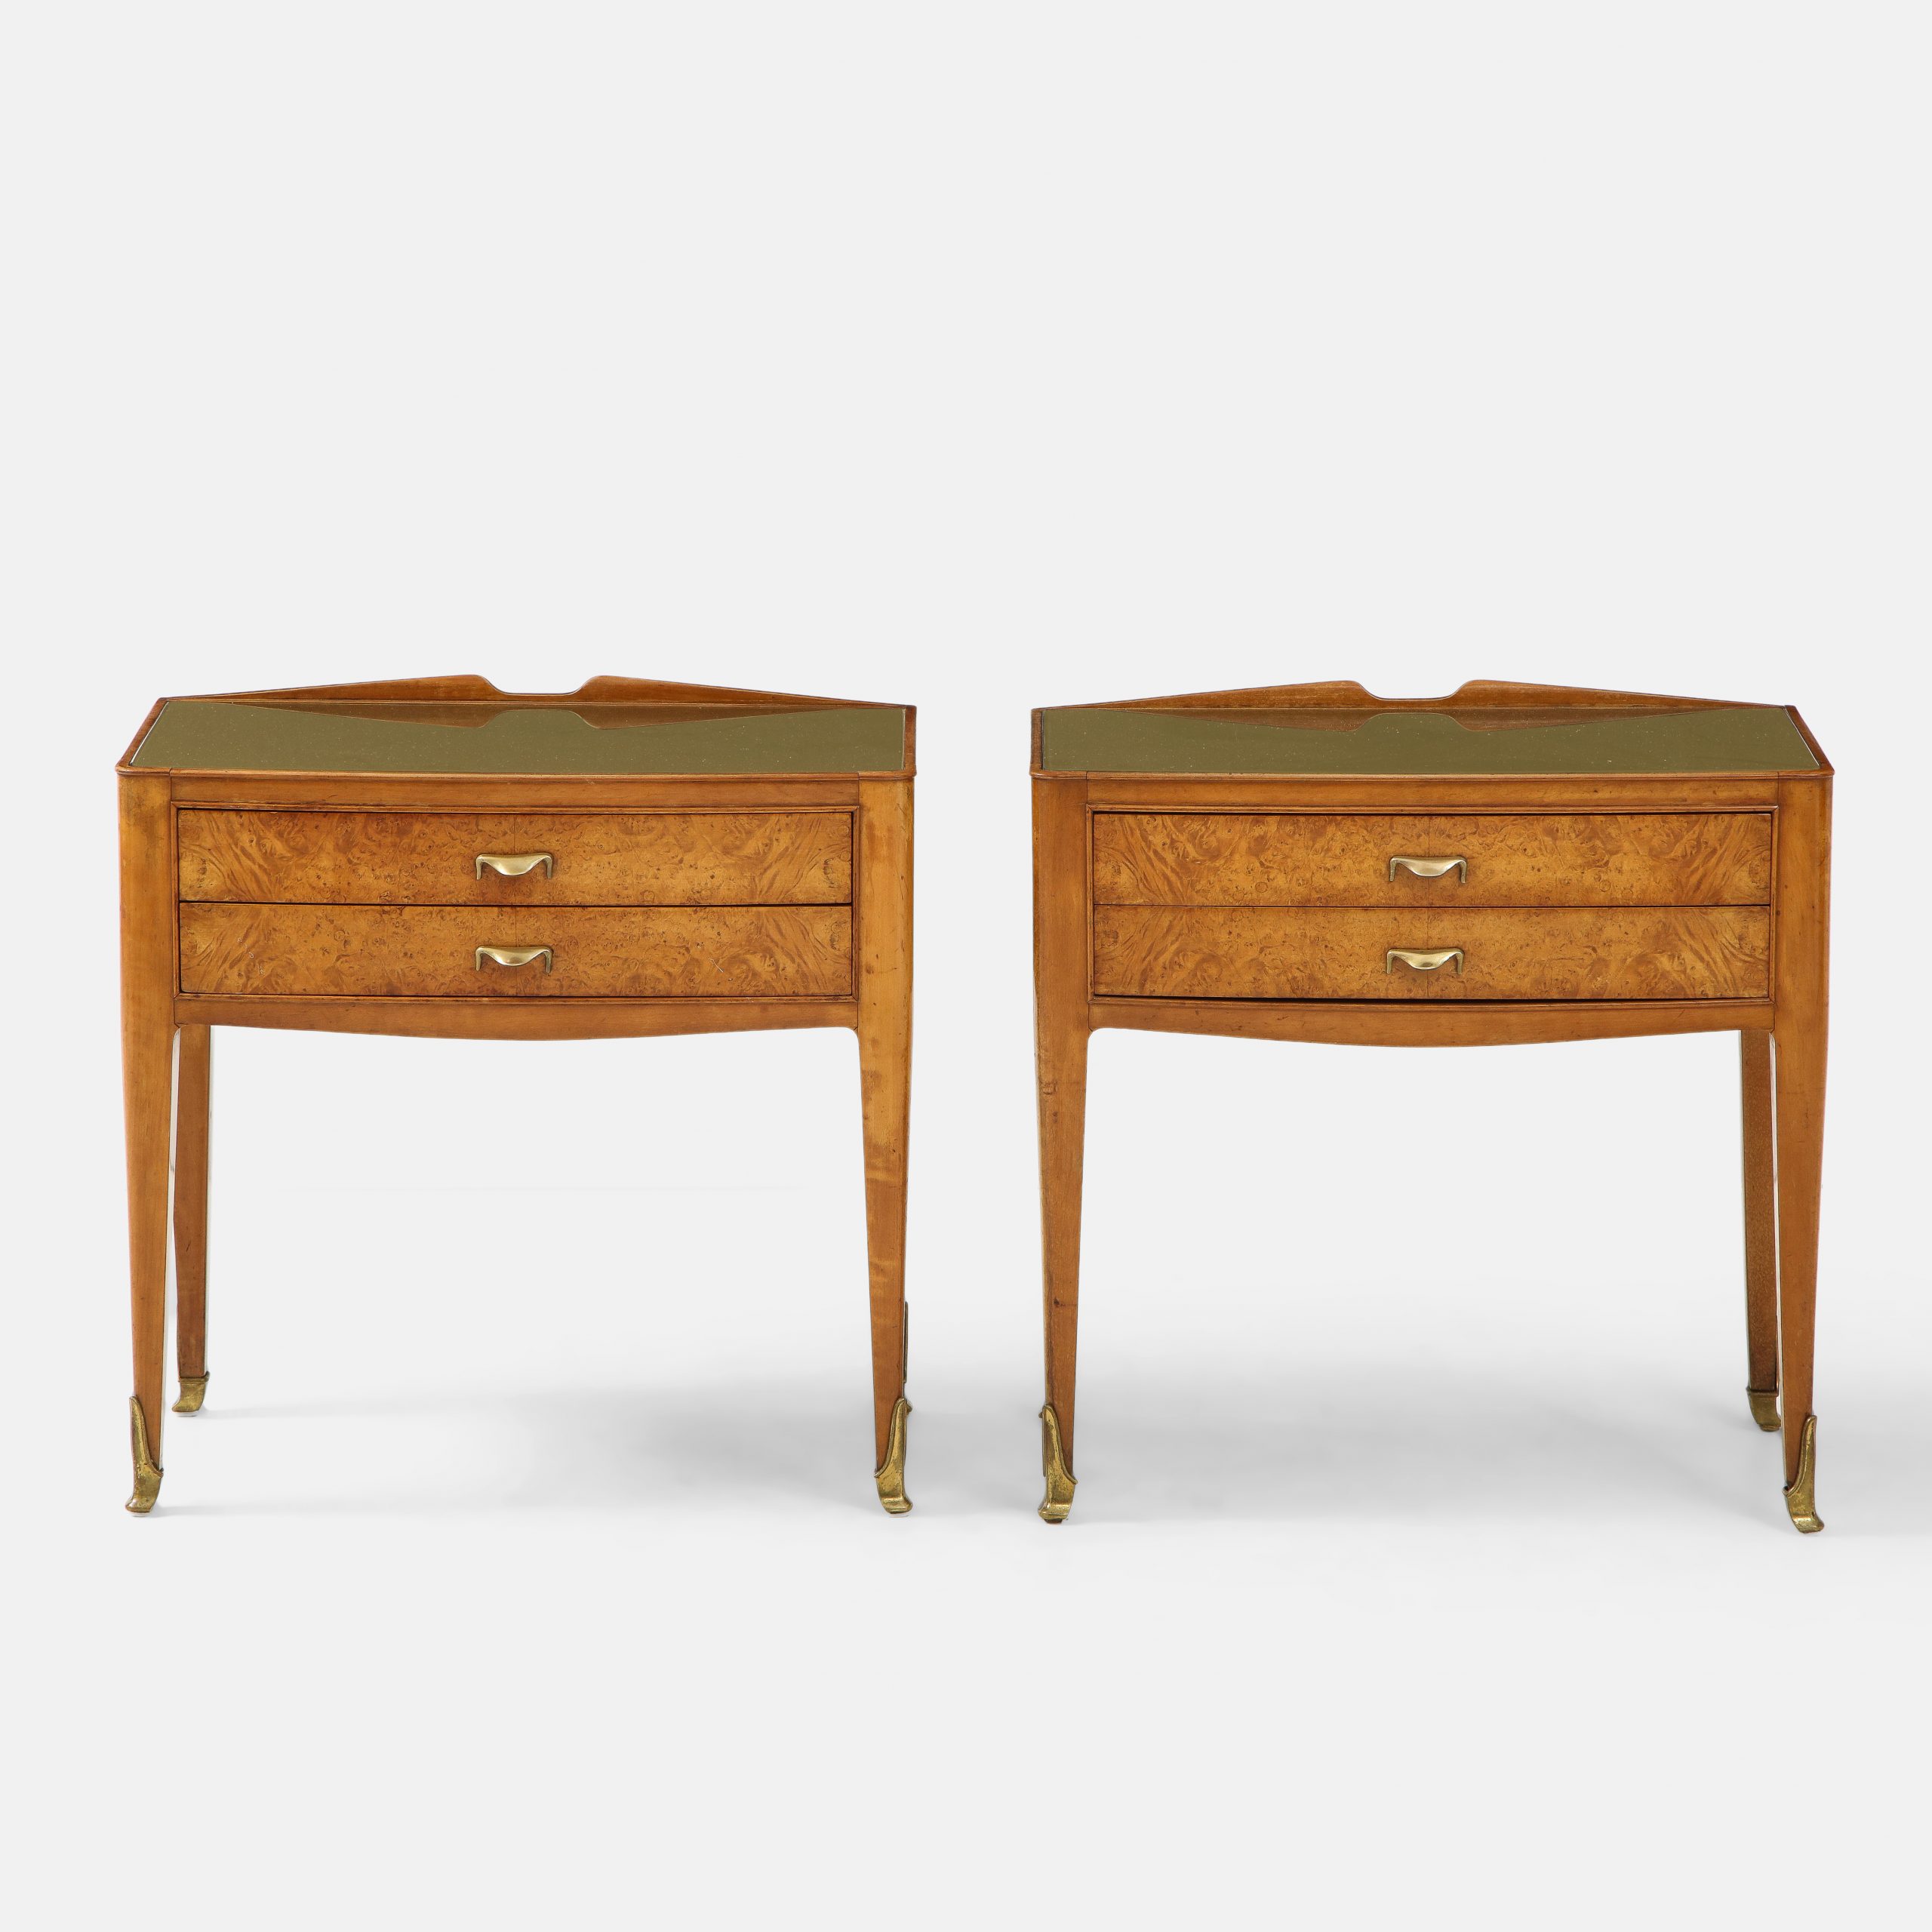 Pair of Bedside Tables in Thuja Burl Wood, Brass and Glass by  | soyun k.